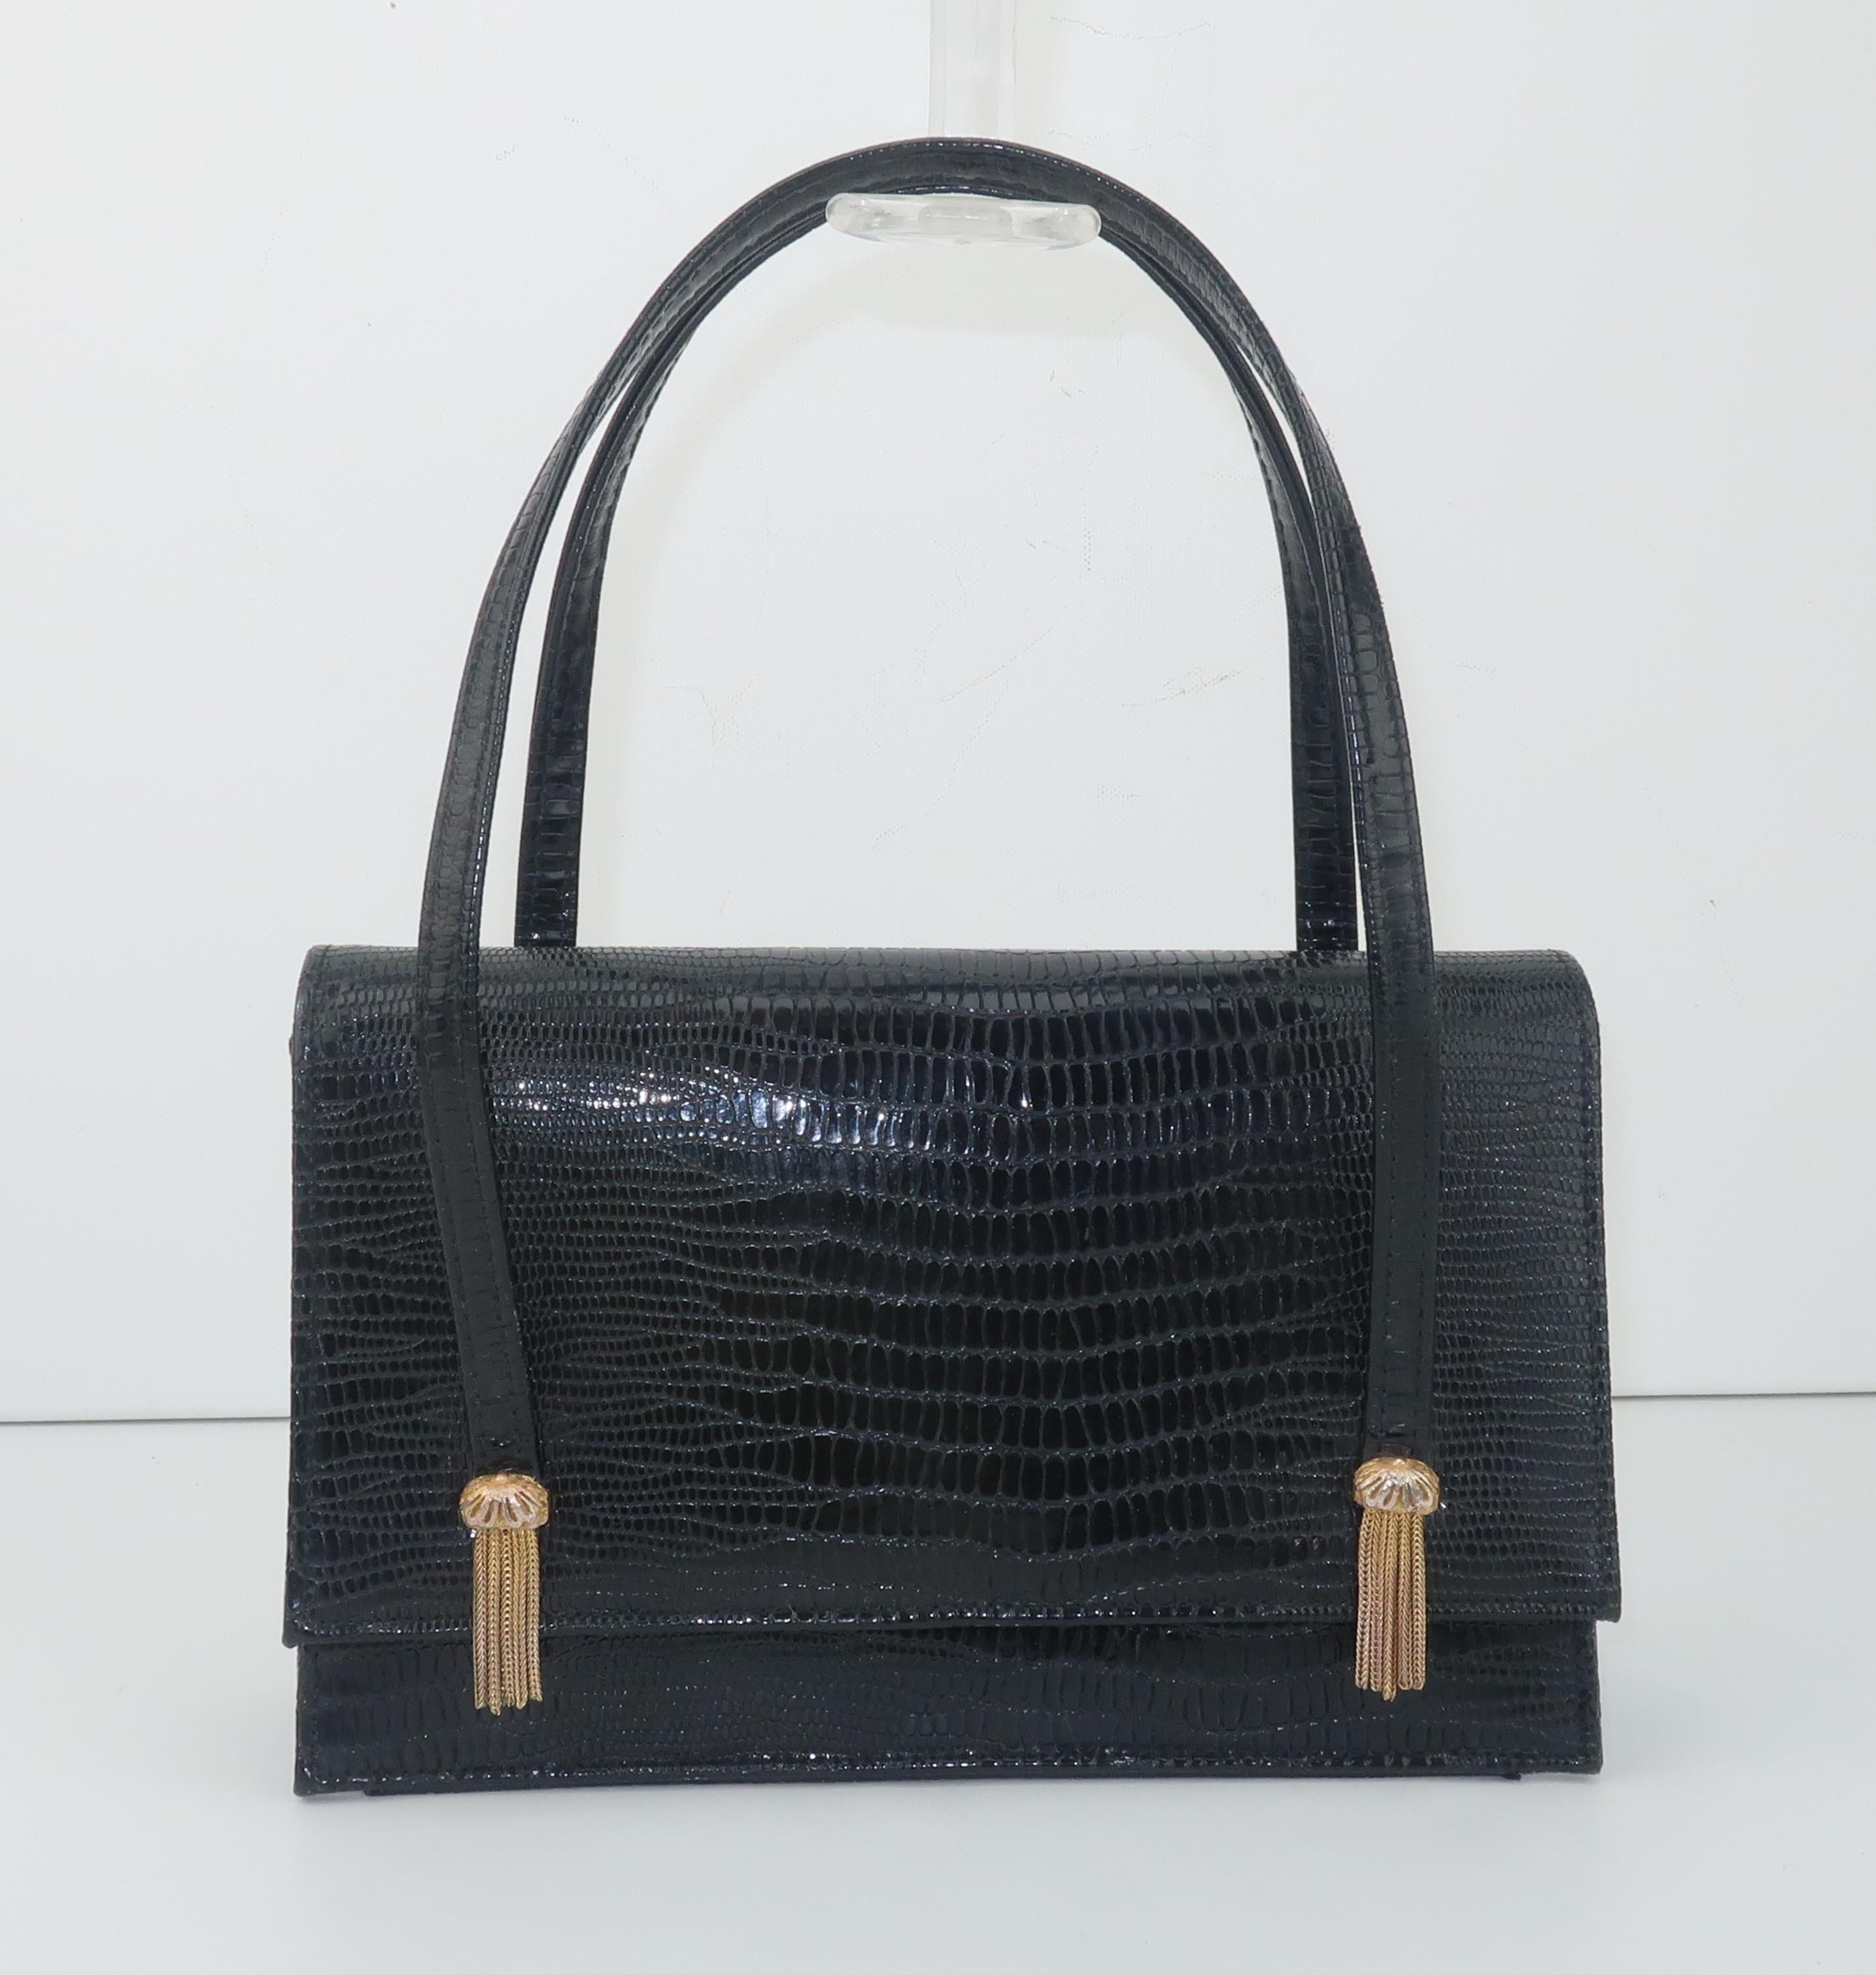 C.1960 Meyers black lizard embossed leather handbag with double handles and two decorative gold tone chain 'tassels'.  The bag snaps securely at the front and opens to a vinyl lined interior with open side pockets trimmed in gold.  Originally